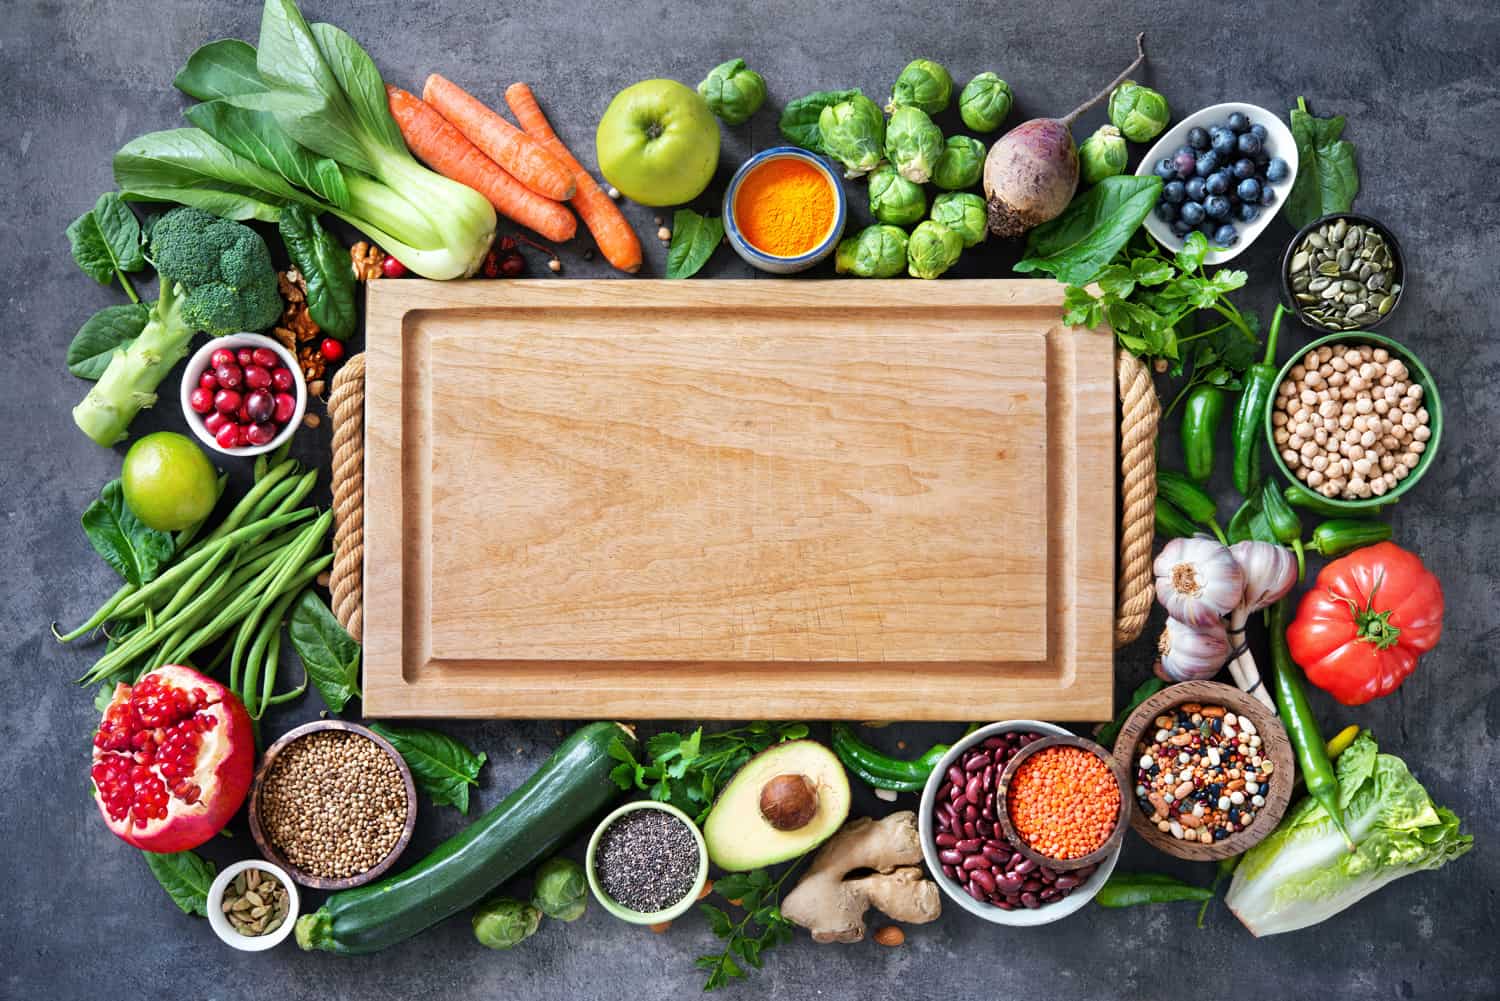 Healthy food selection with fruits, vegetables, seeds, super foods, cereals and the cutting board in the middle as copy space